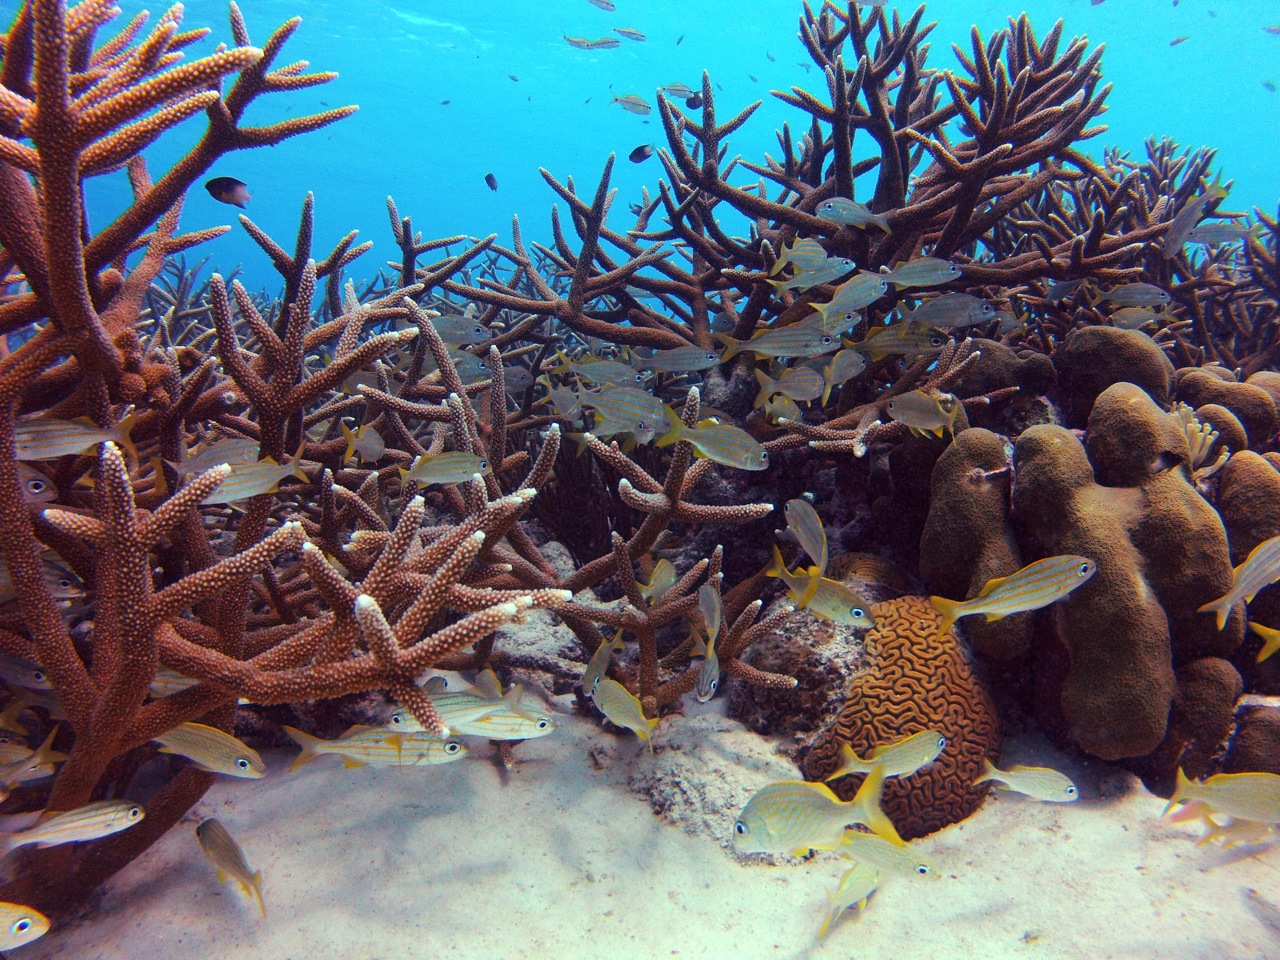 11 Patch of healthy staghorn coral